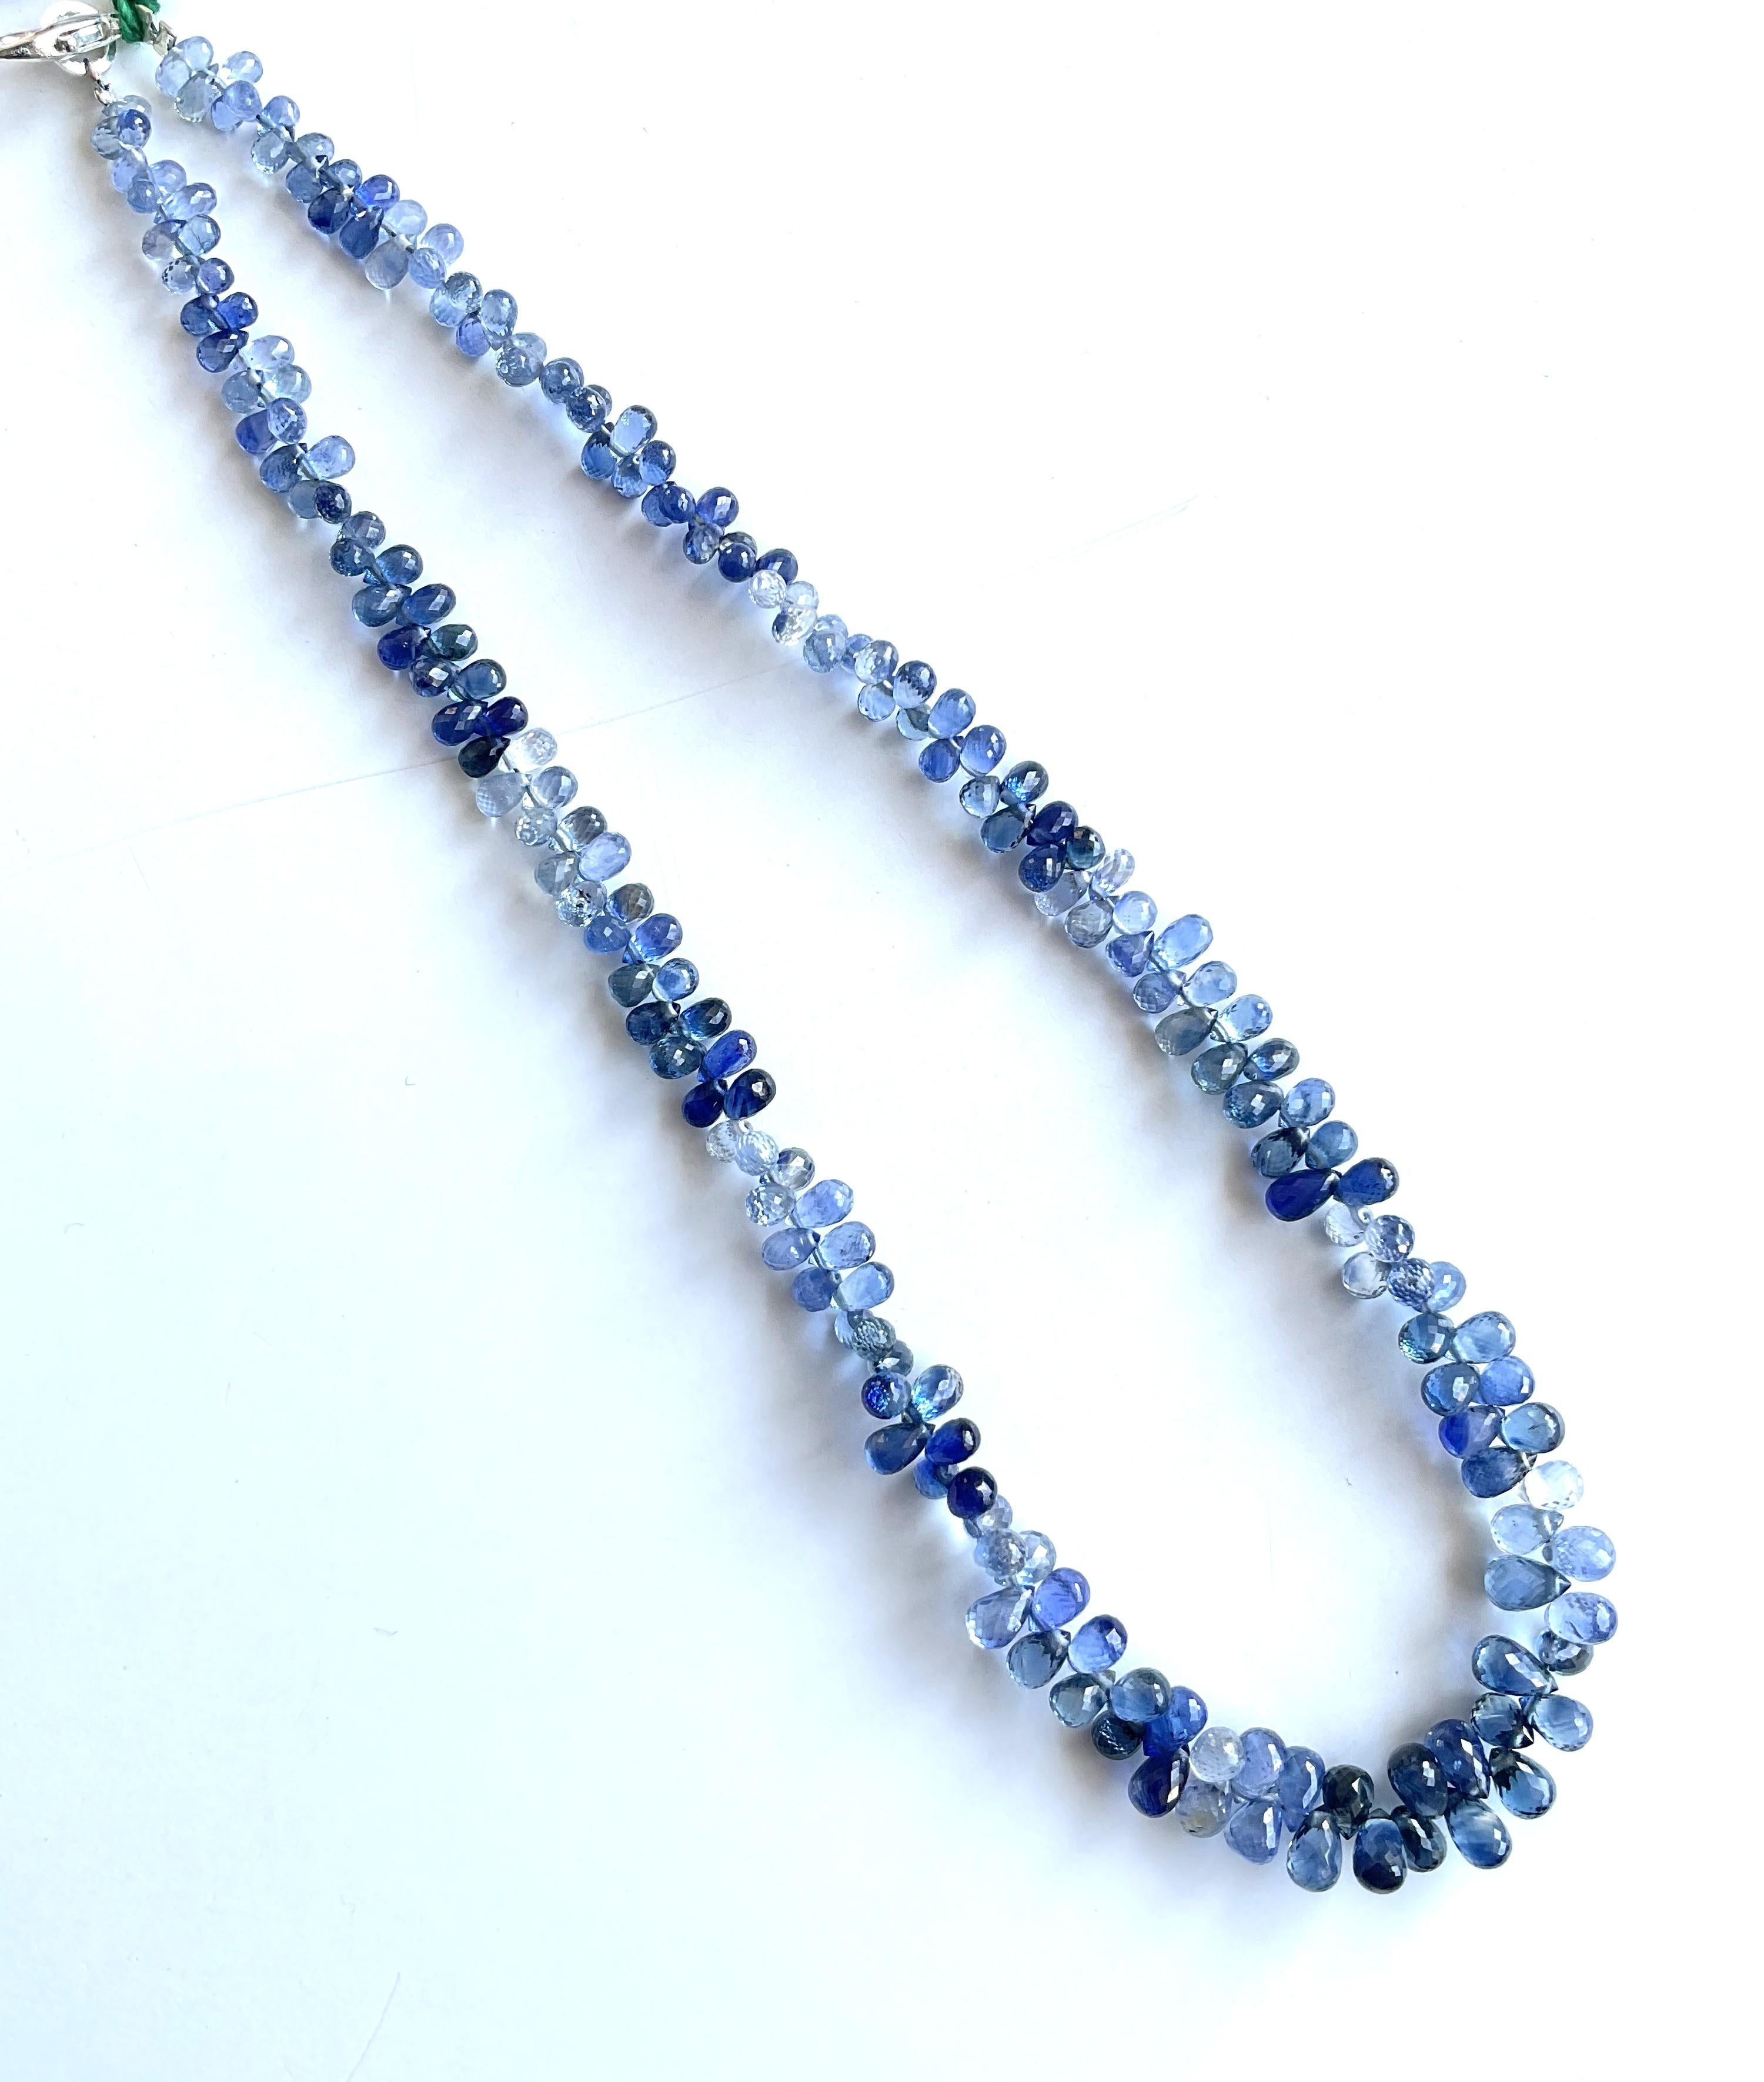 80.00 Carats Blue Sapphire Drops Top Quality Natural Gemstone For Fine Jewelry

Gemstone - Sapphire
Weight - 80.00 carats
Shape - Drops
Size - 3x2 To 4x5 MM
Quantity - 1 line
length : 16 Inch. 